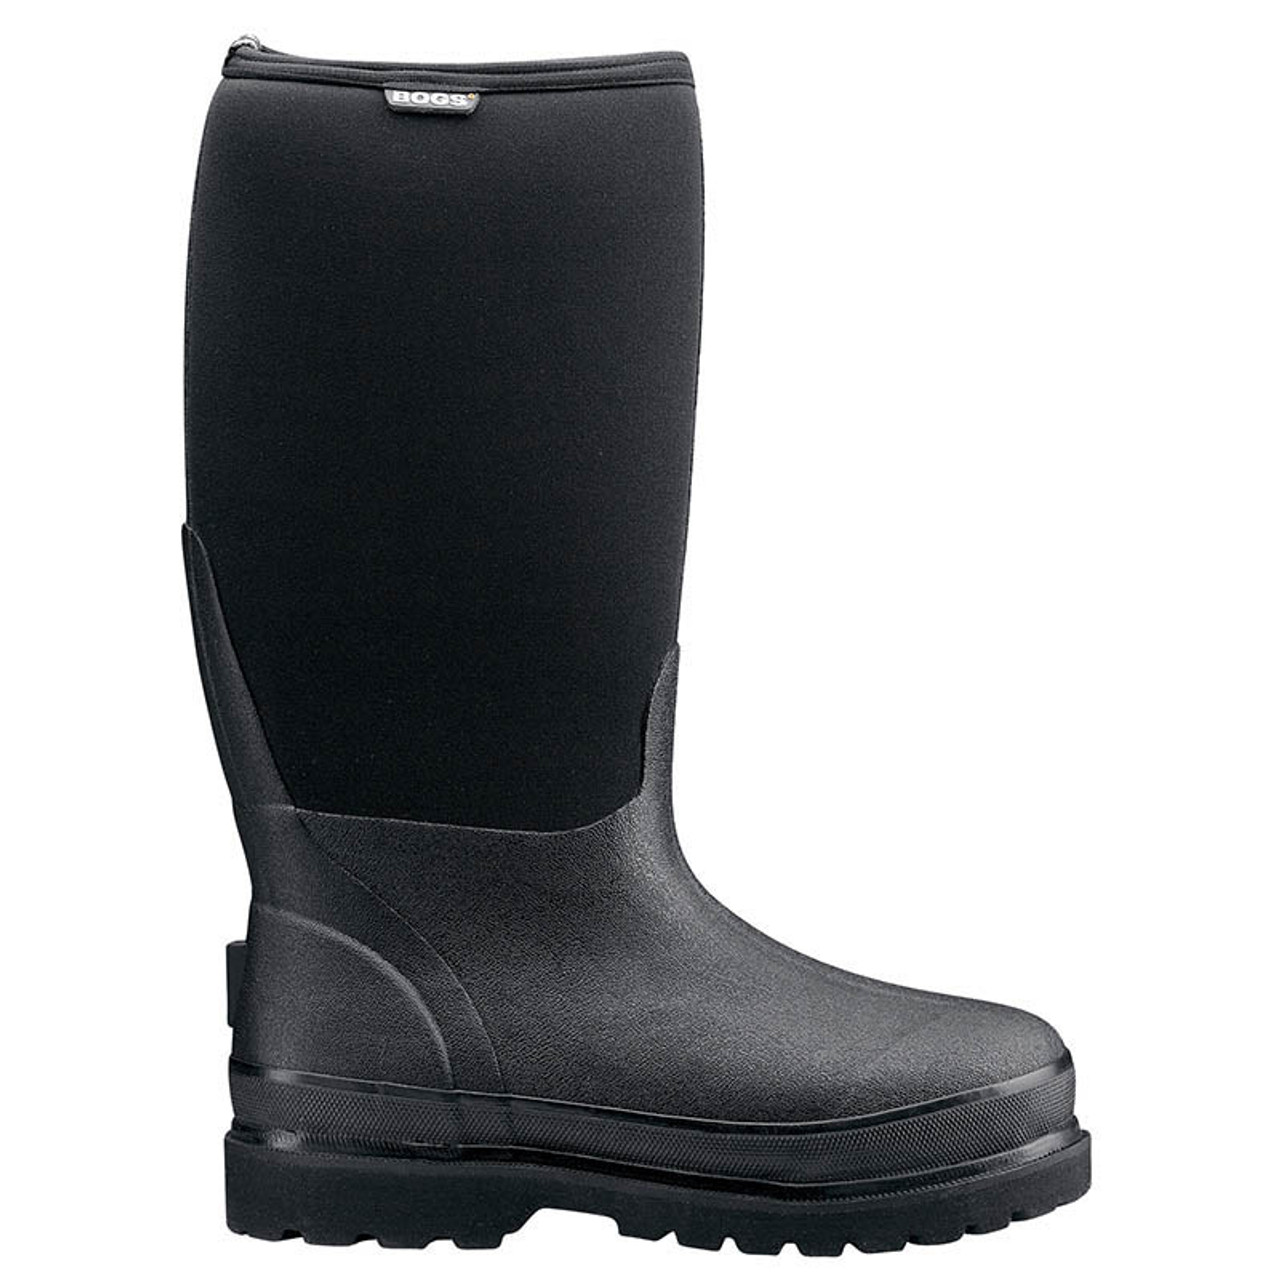 mens insulated rubber boots